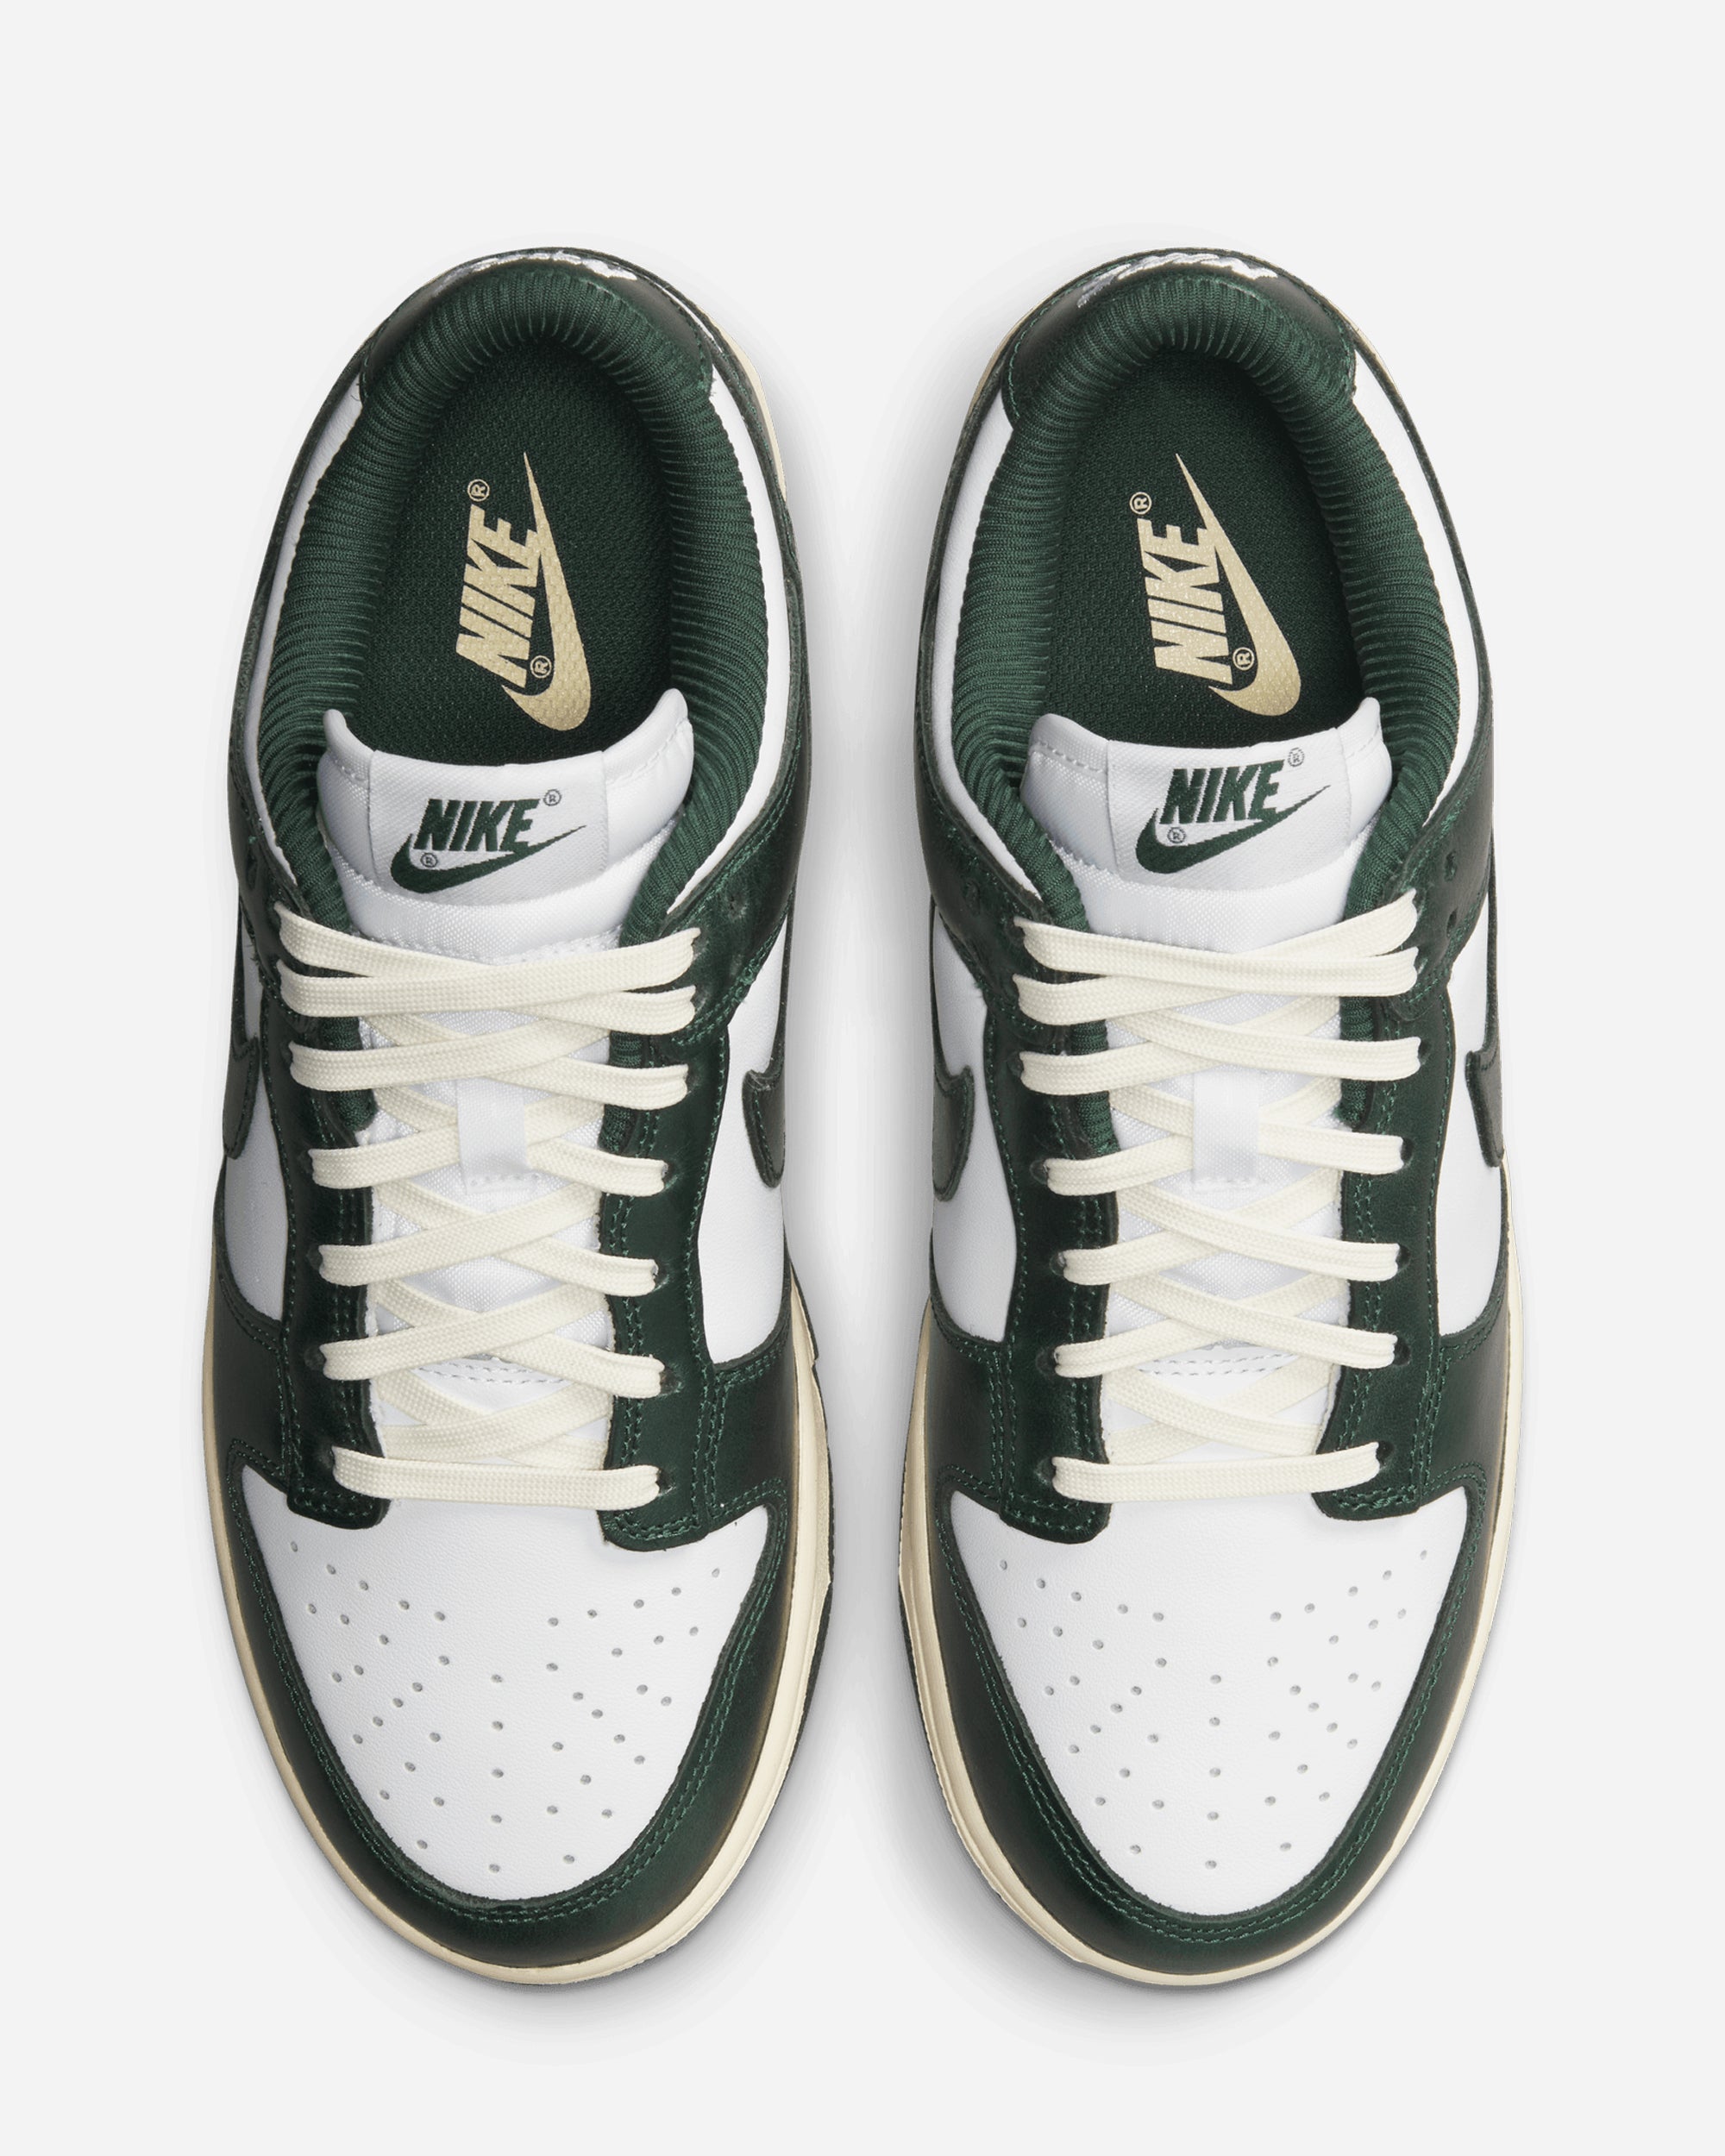 Nike Dunk Low 'Vintage Green' WHITE/PRO GREEN-COCONUT MILK DQ8580-100